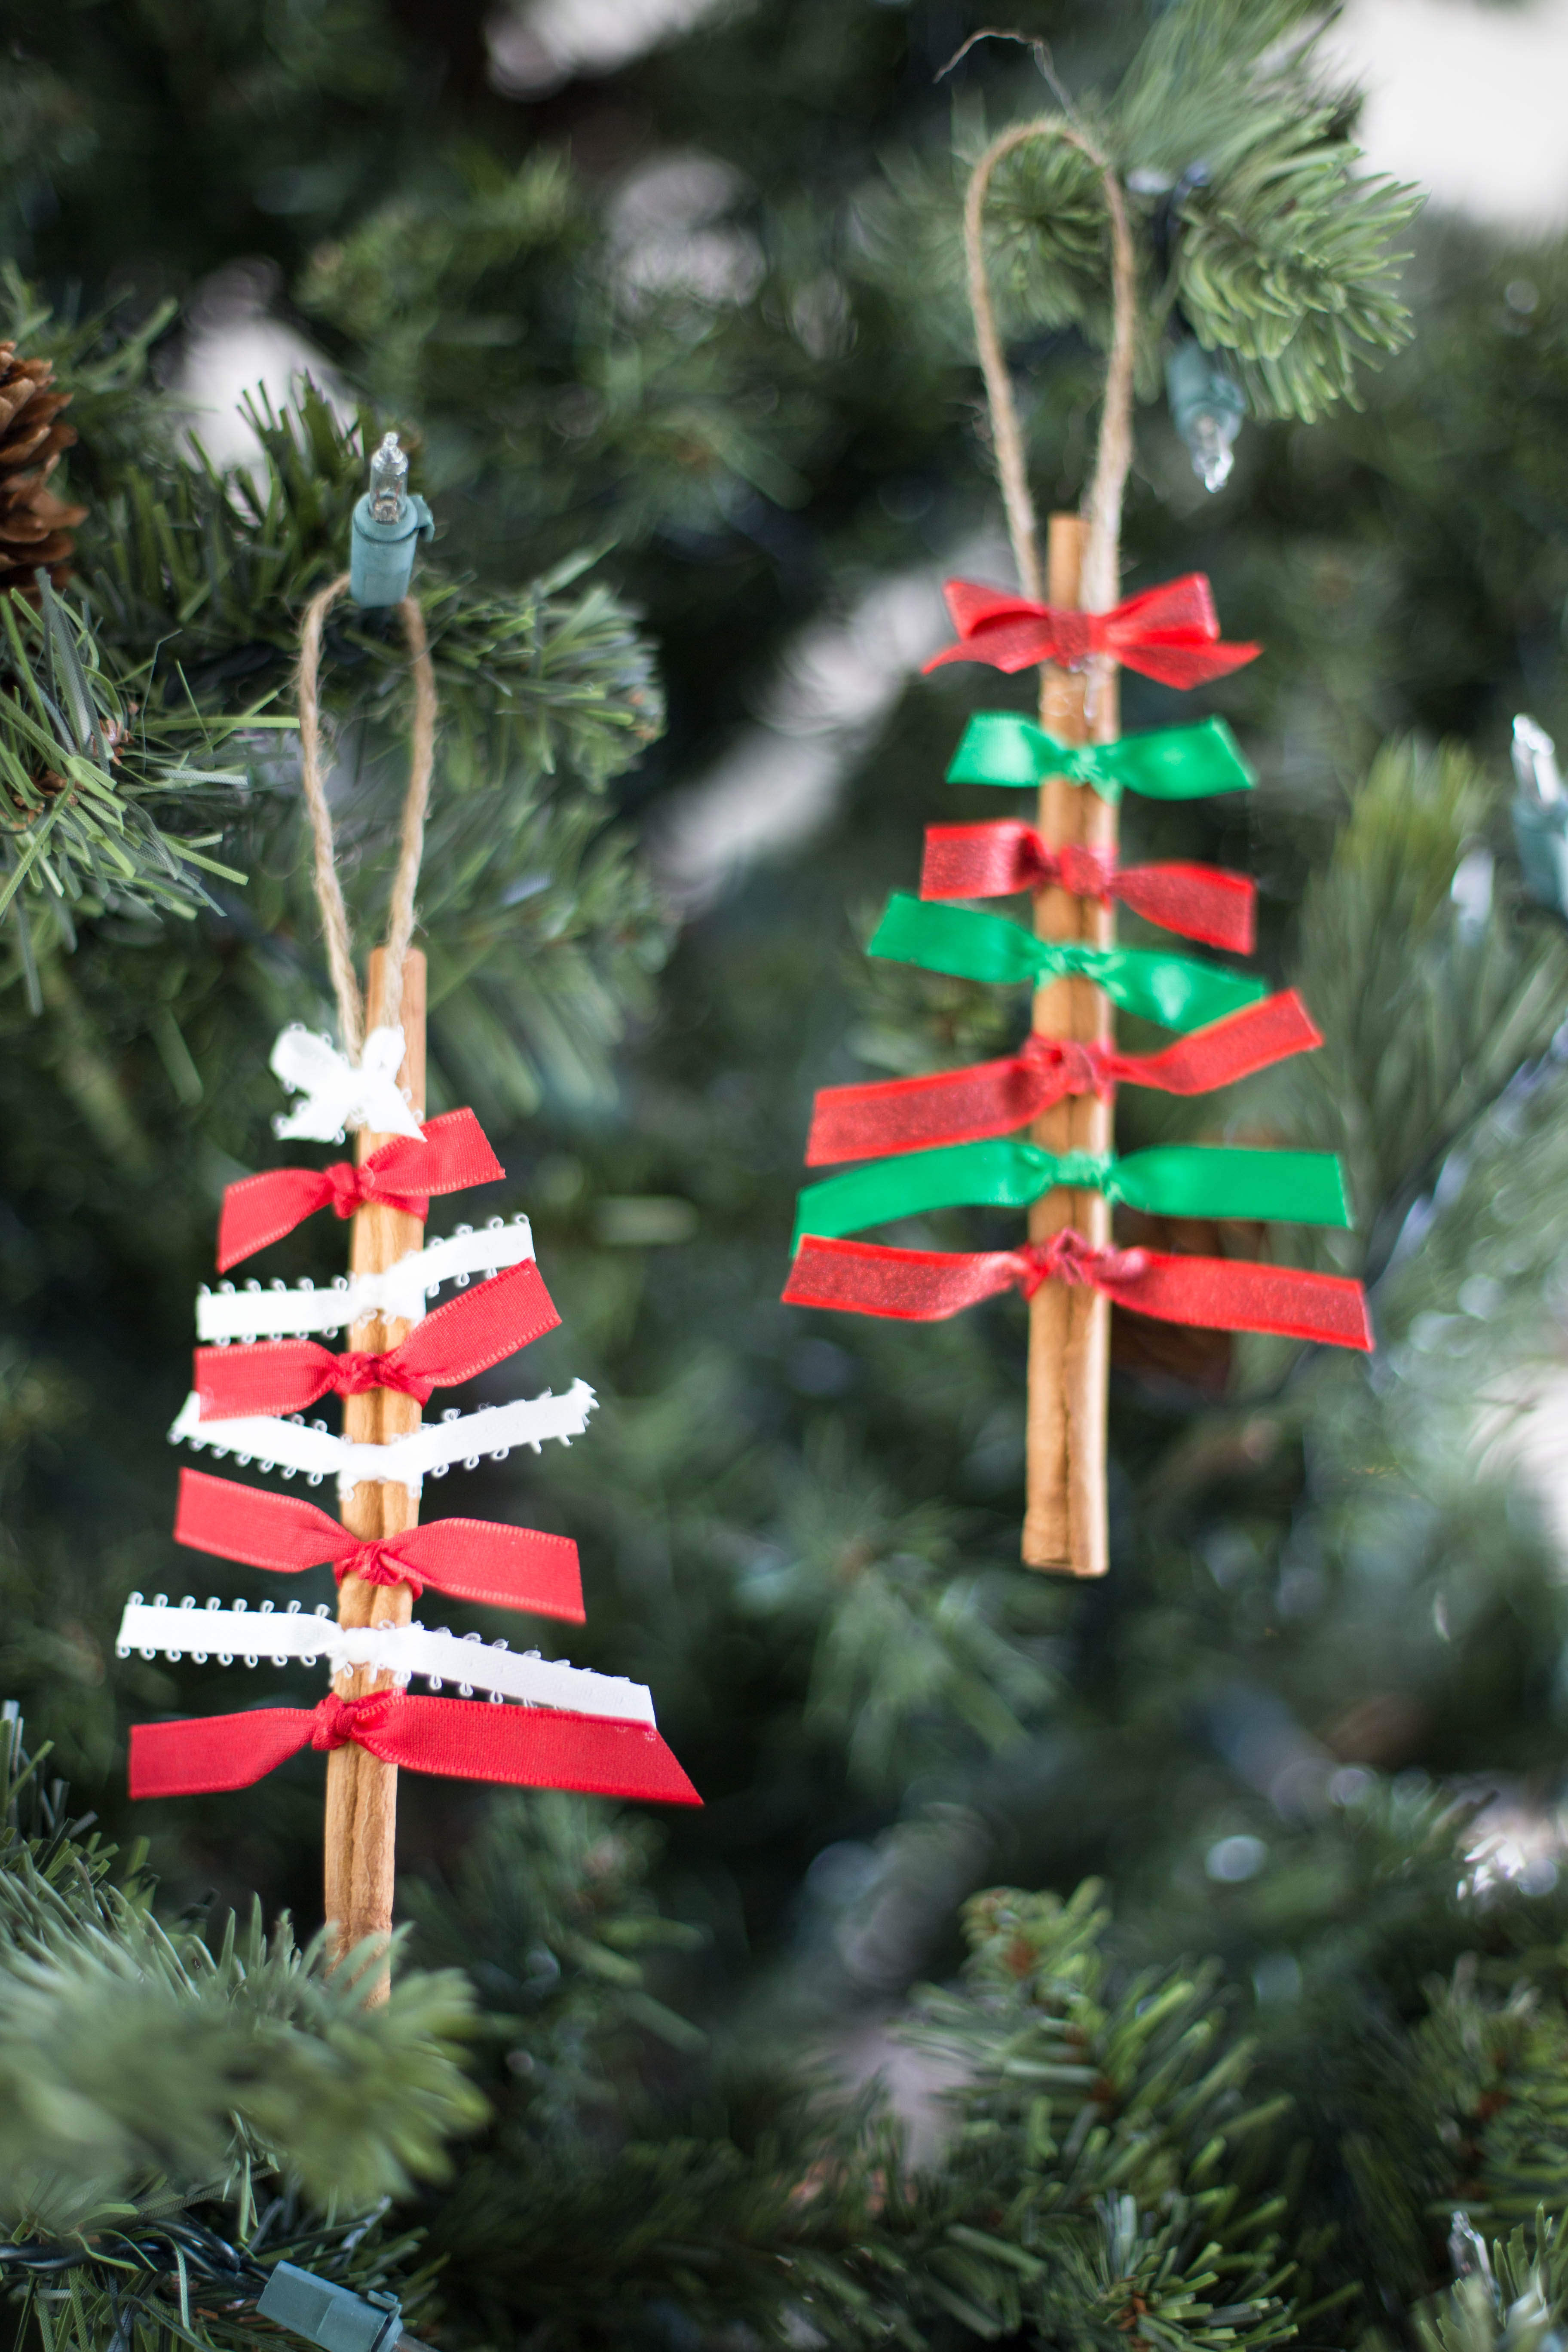  Tree Ornaments with Simple Decor